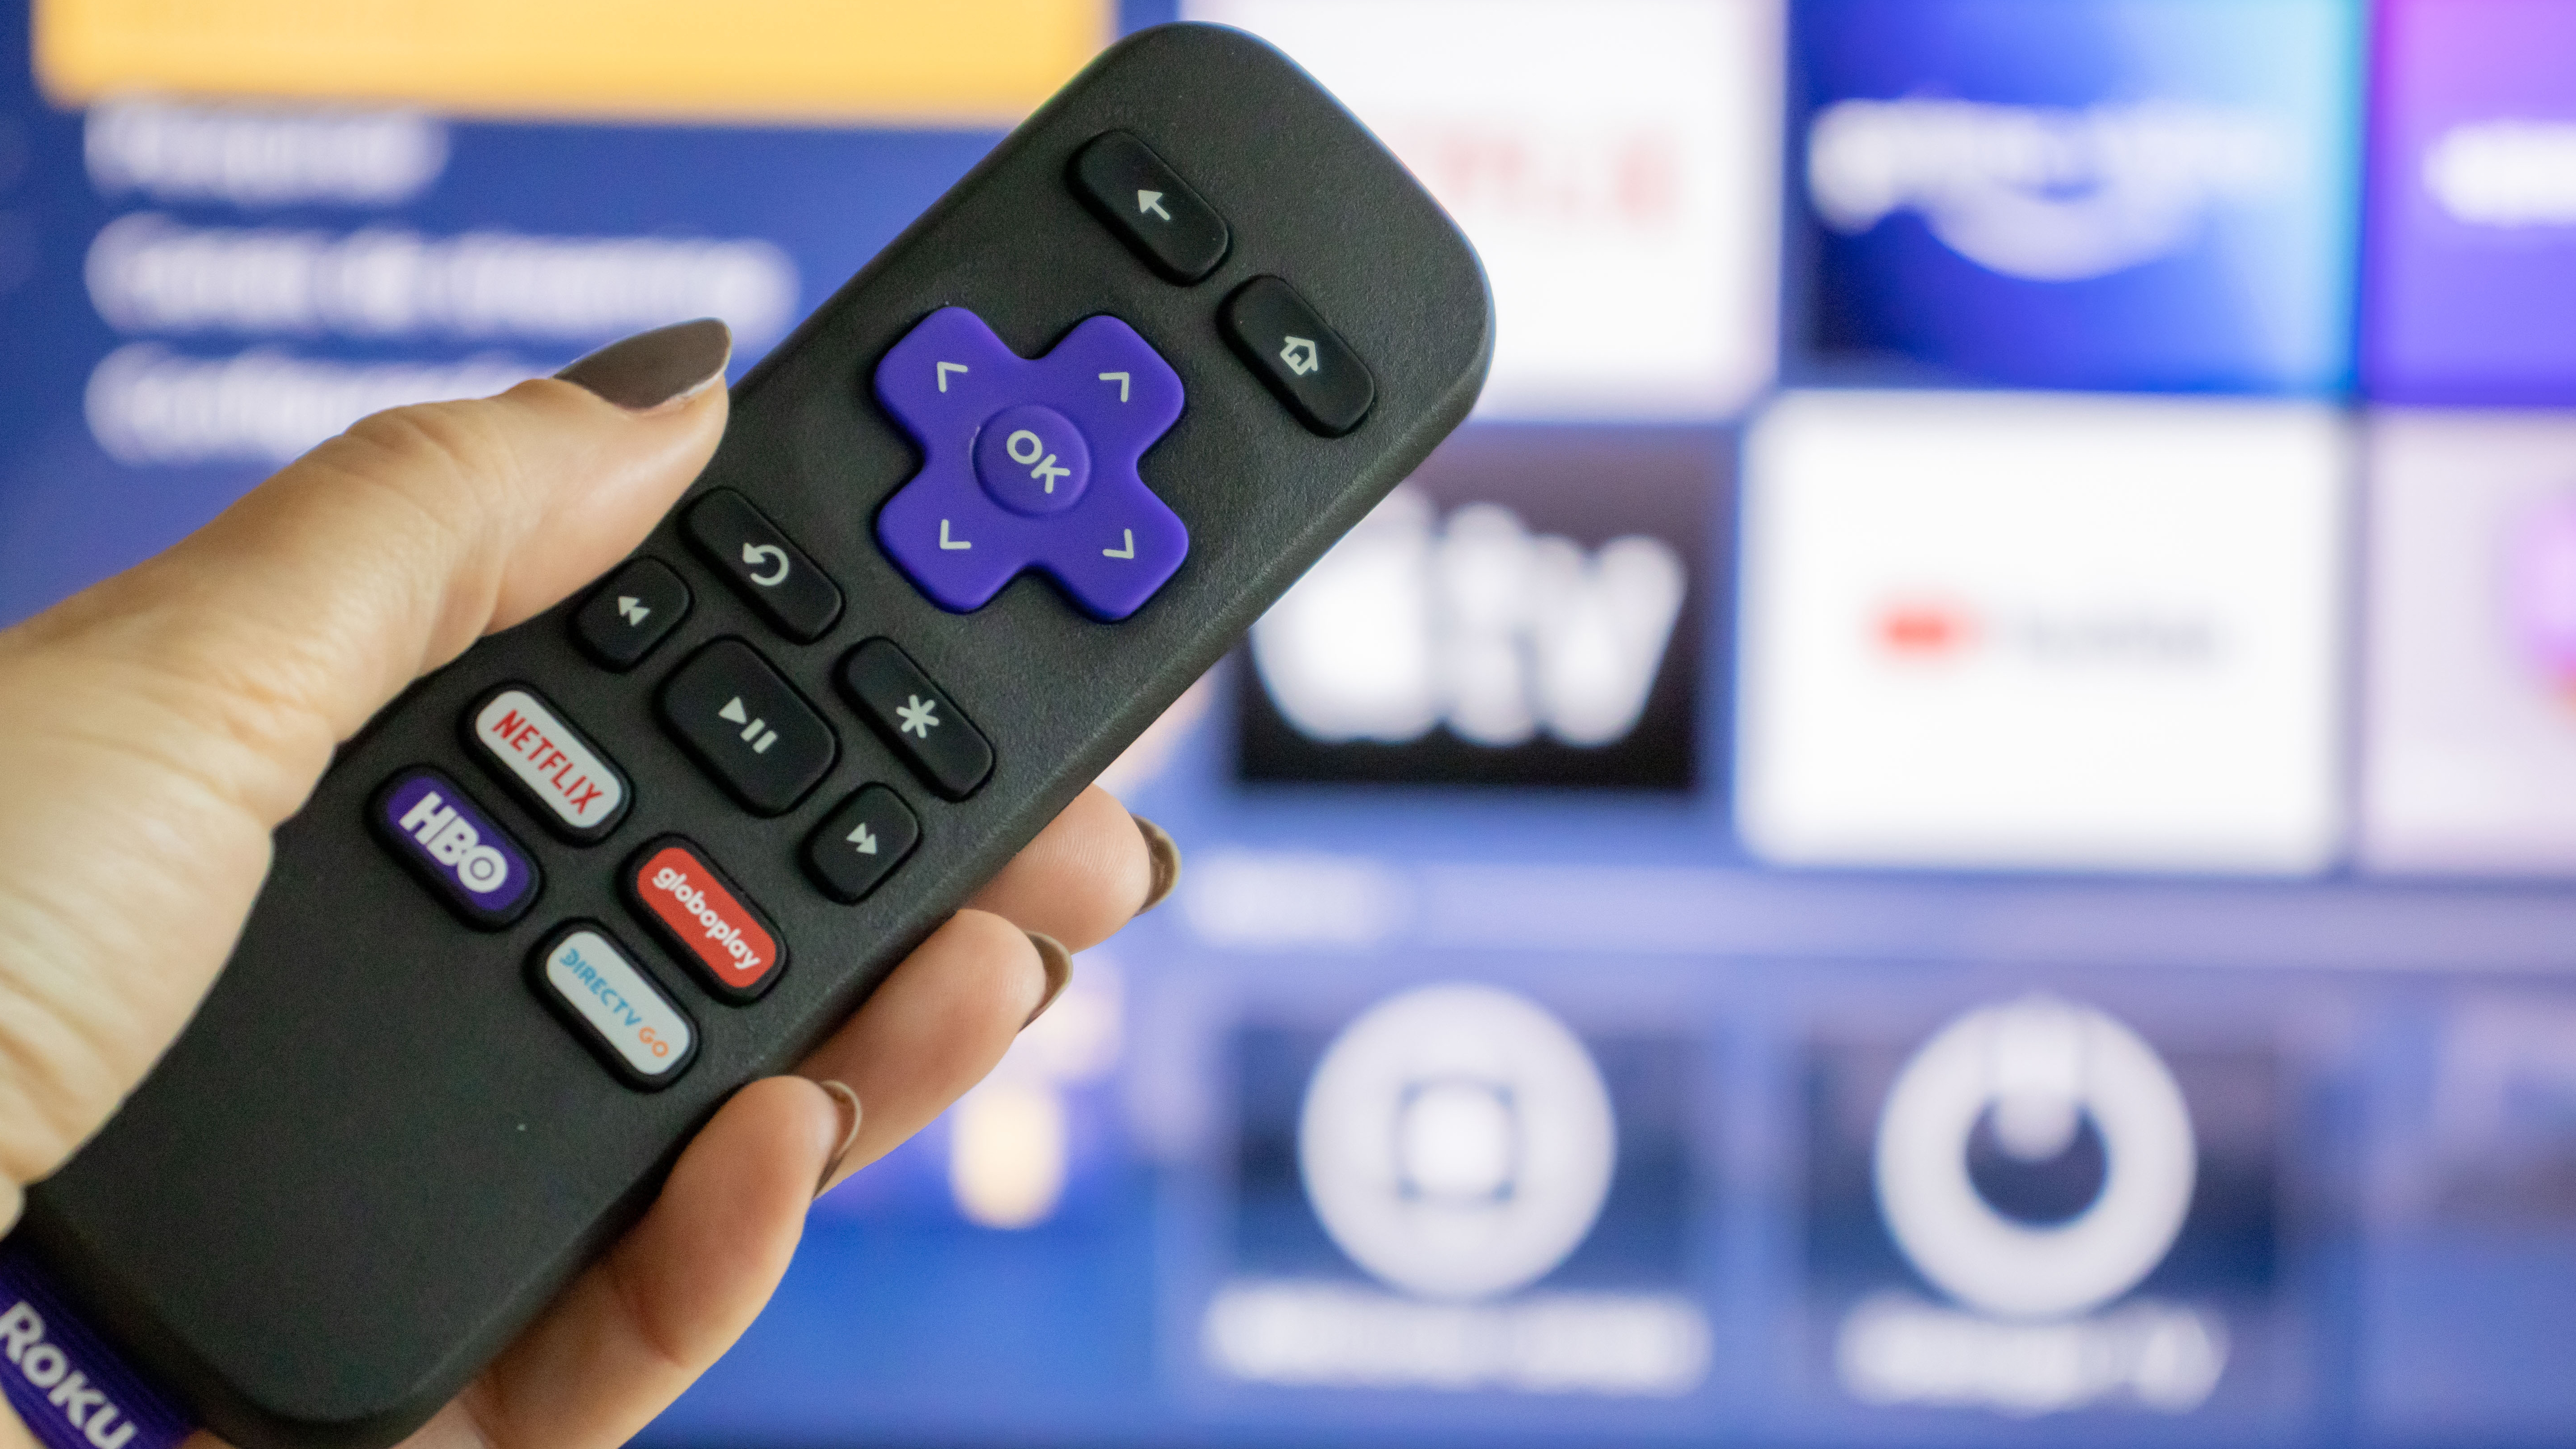 Go to the home screen on your Roku device and navigate to the Netflix app.
Press the asterisk (*) button on your Roku remote.